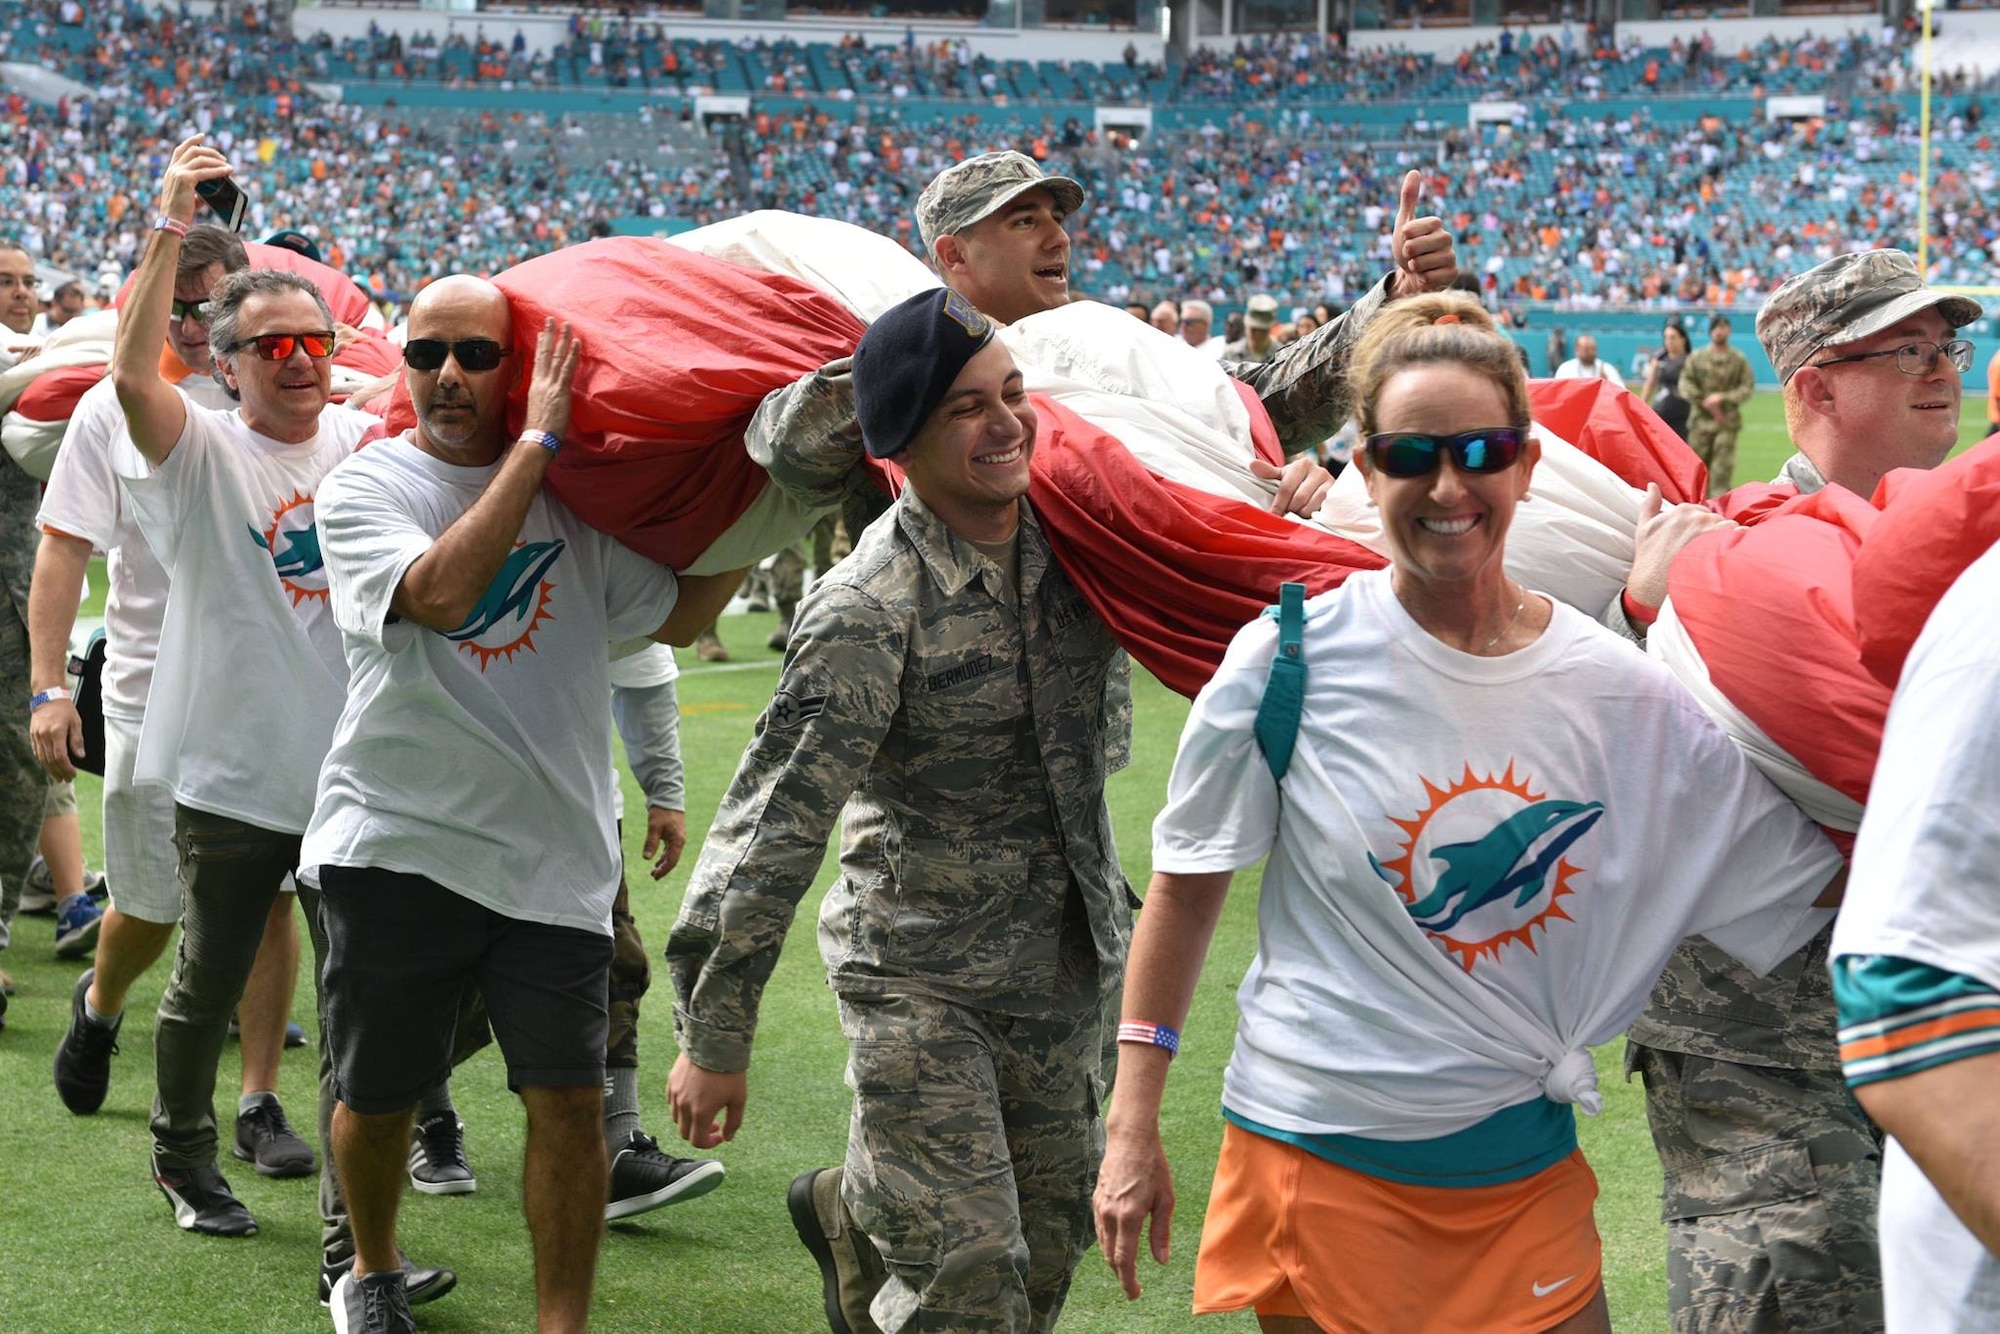 Airmen and local community members unfurl the flag for the National Anthem prior to the start of a Miami Dolphins football game on Dec 2, 2018 in Miami. Approximately 75 Airmen from Patrick Air Force Base, Fla. participated in the event. (U.S. Air Force photo by Airman 1st Class Dalton Williams)